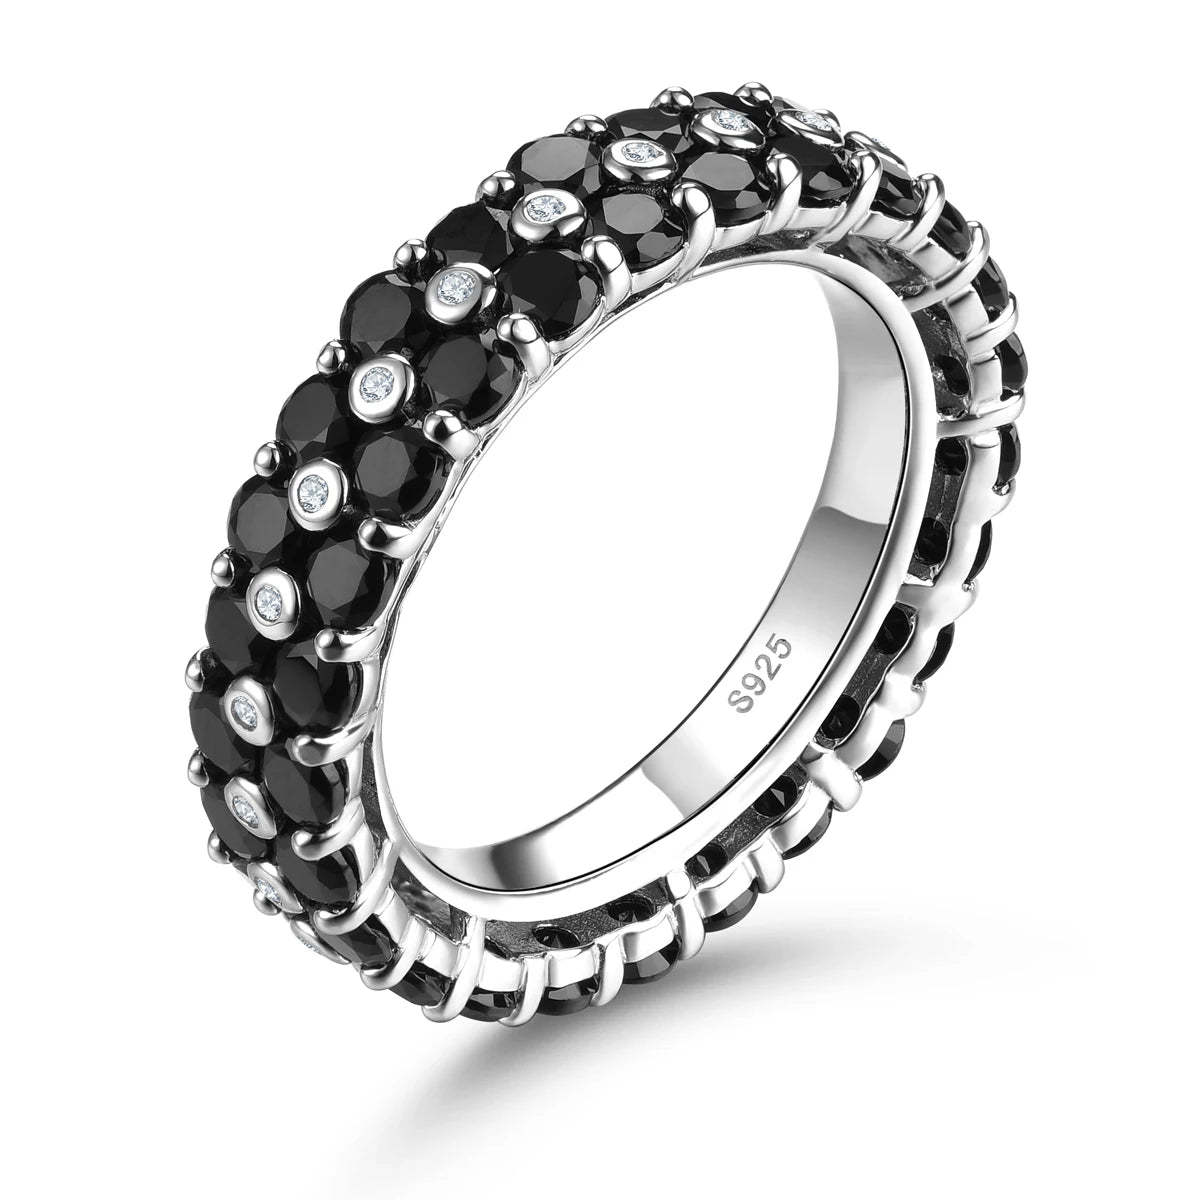 Natural Black Spinel Silver Rings 5.5 Carats Genuine Spinel Classic Fine Jewelry Unisex Style S925 Band Gifts for Birthday Natural Spinel